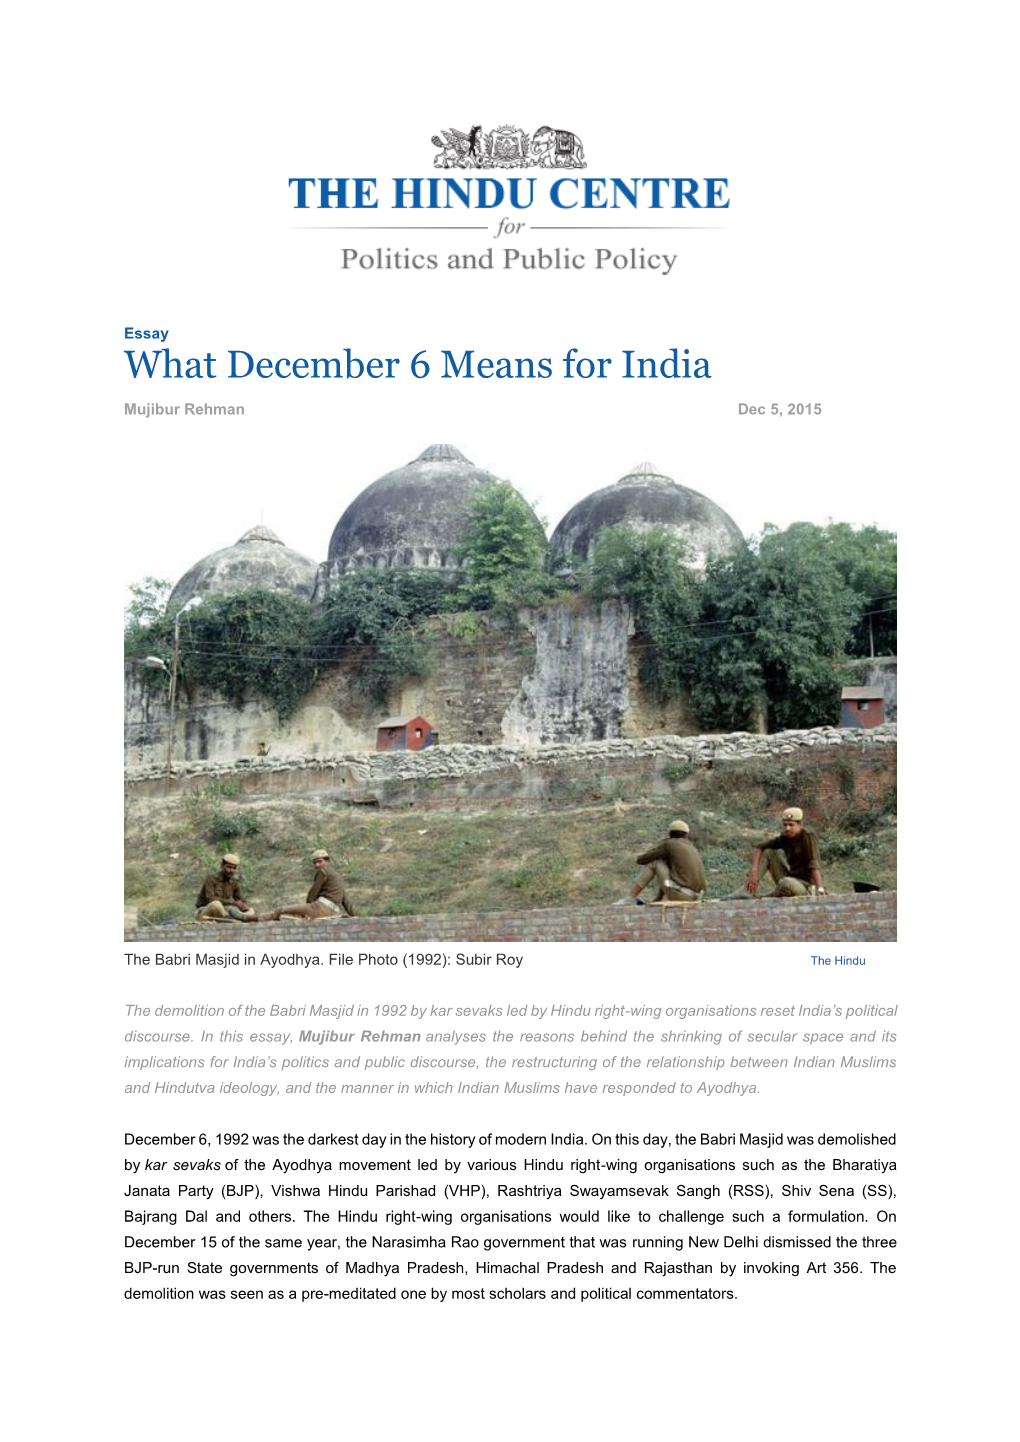 What December 6 Means for India